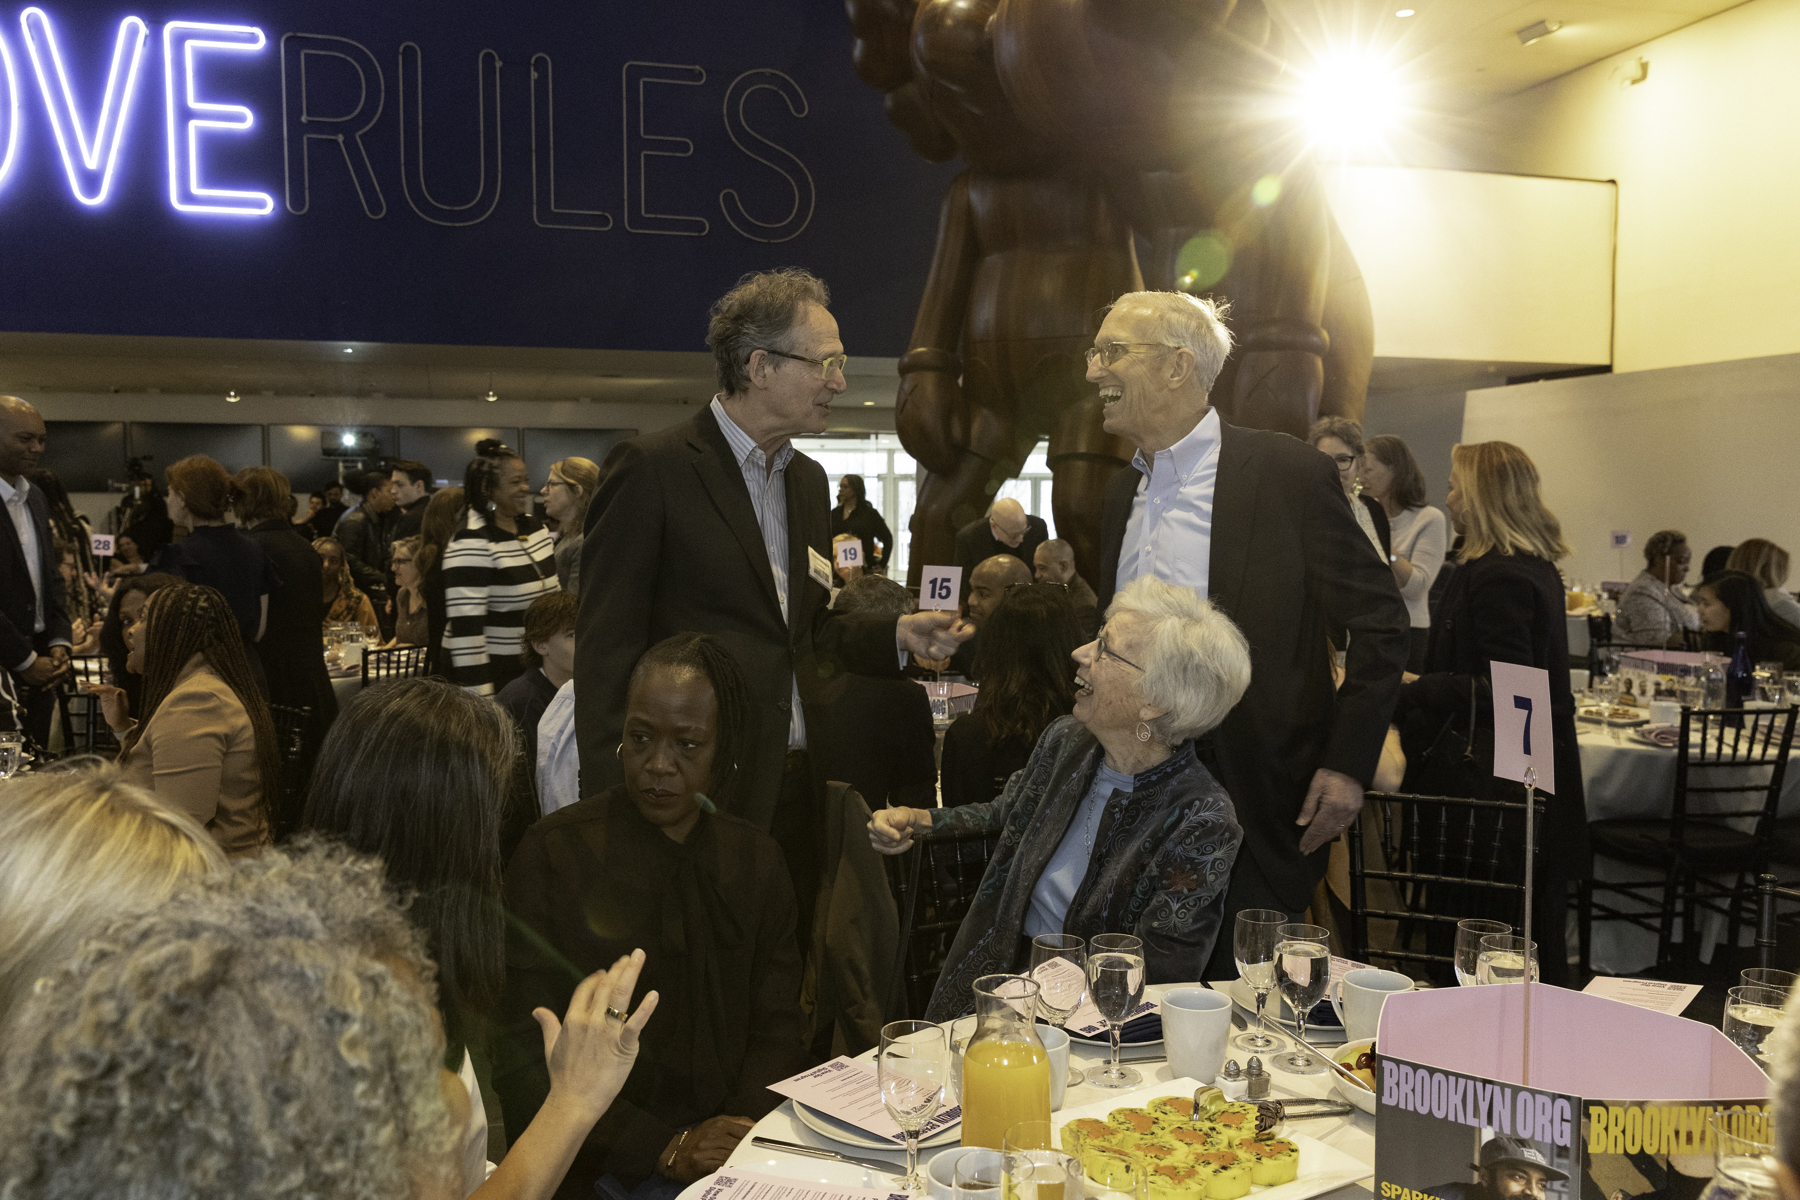 Two men engaged in a standing conversation at a crowded event with seated guests and a large sculpture in the background.